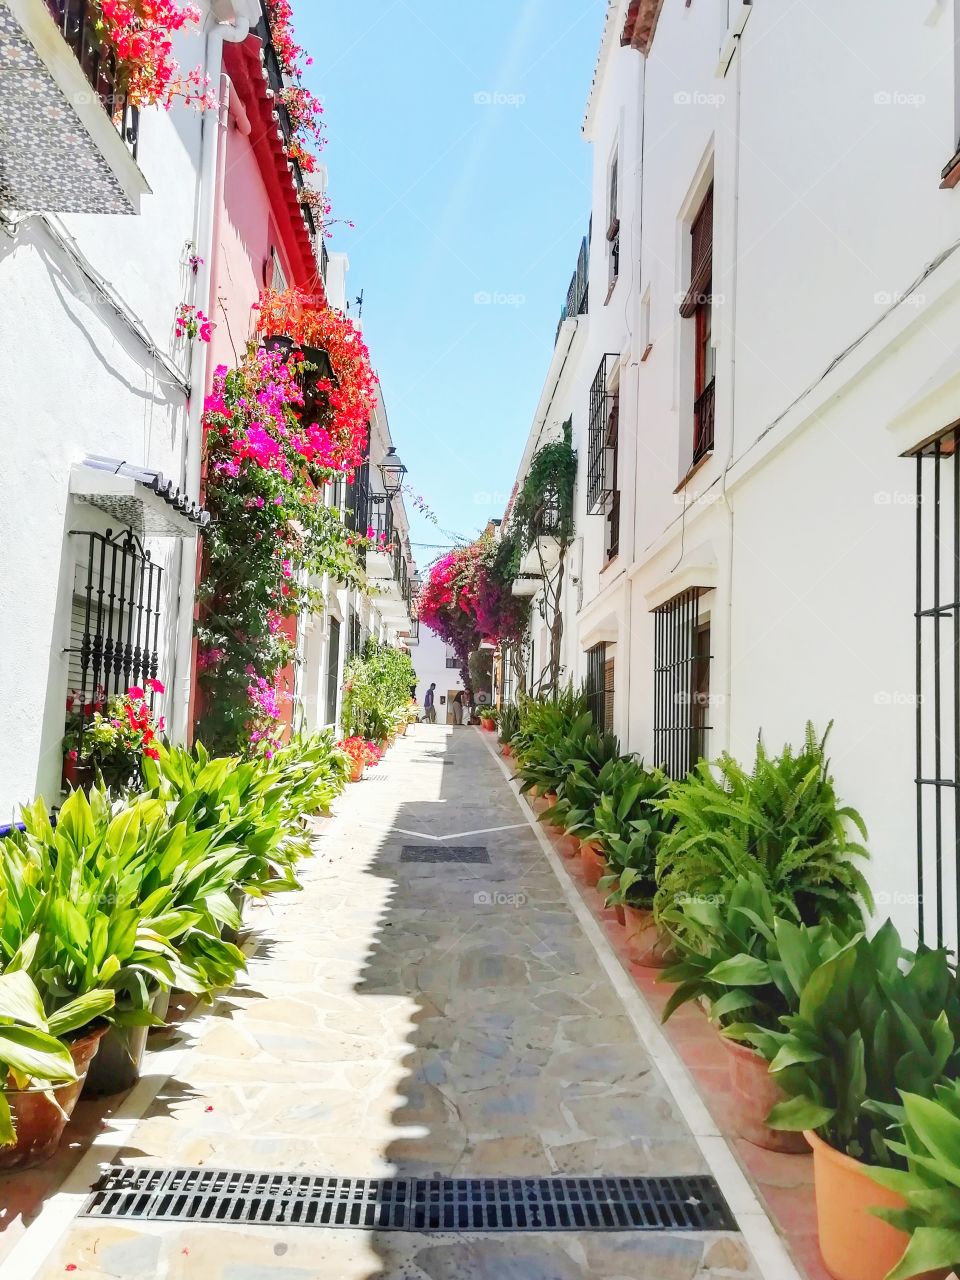 Quiet Spanish street lined with plants and flowers